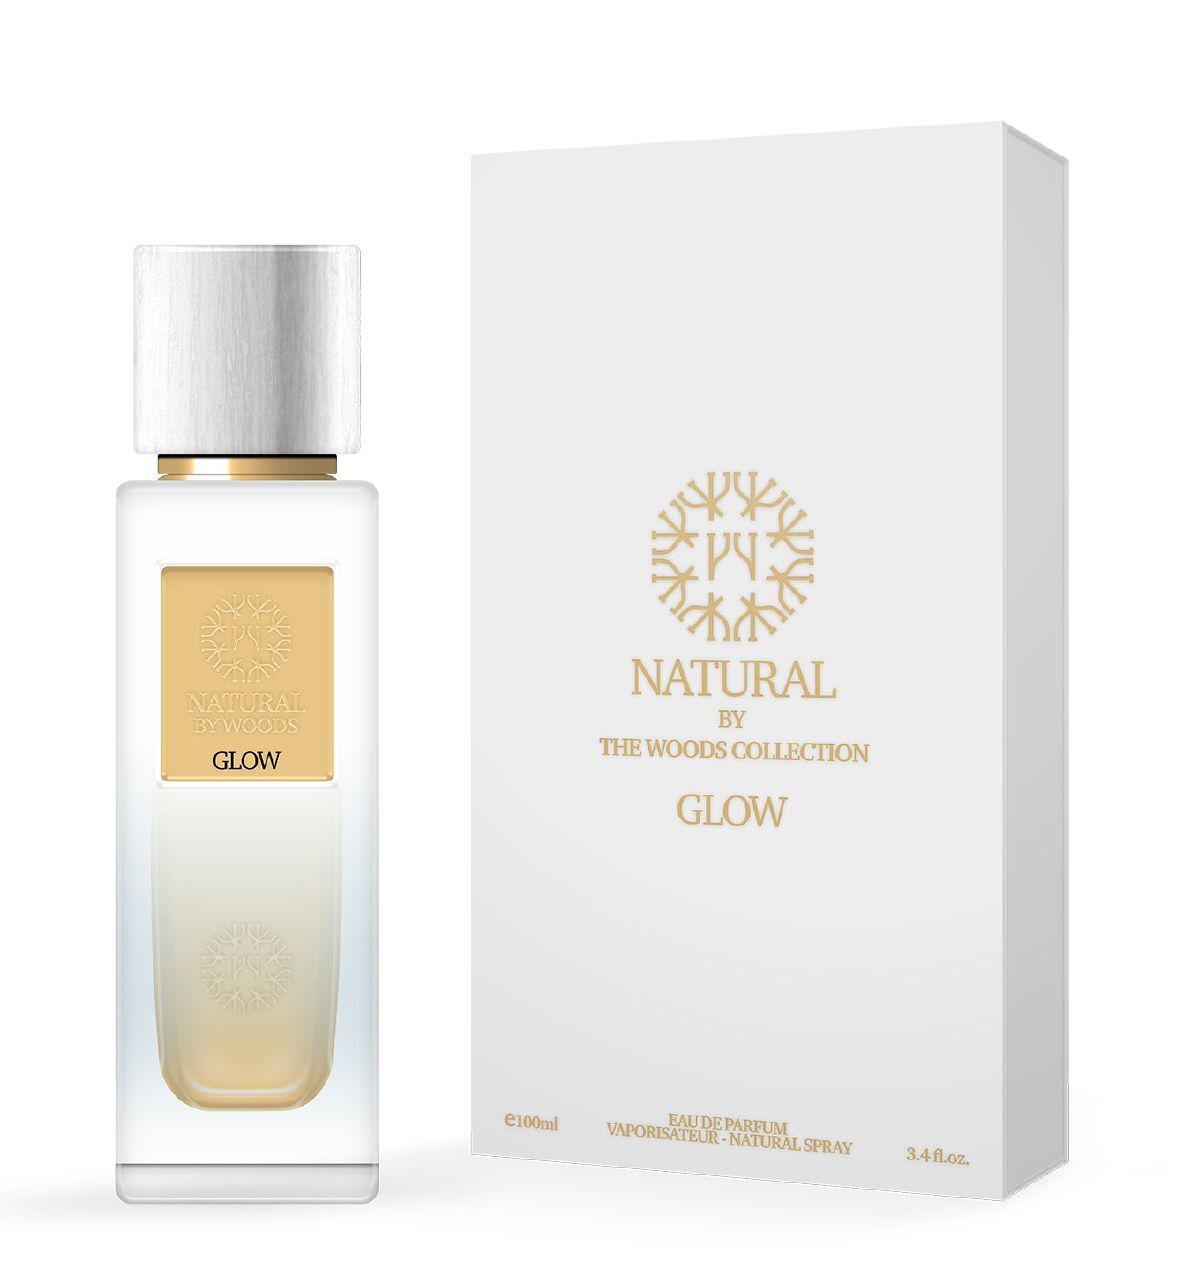 The Woods Collection Glow EDP